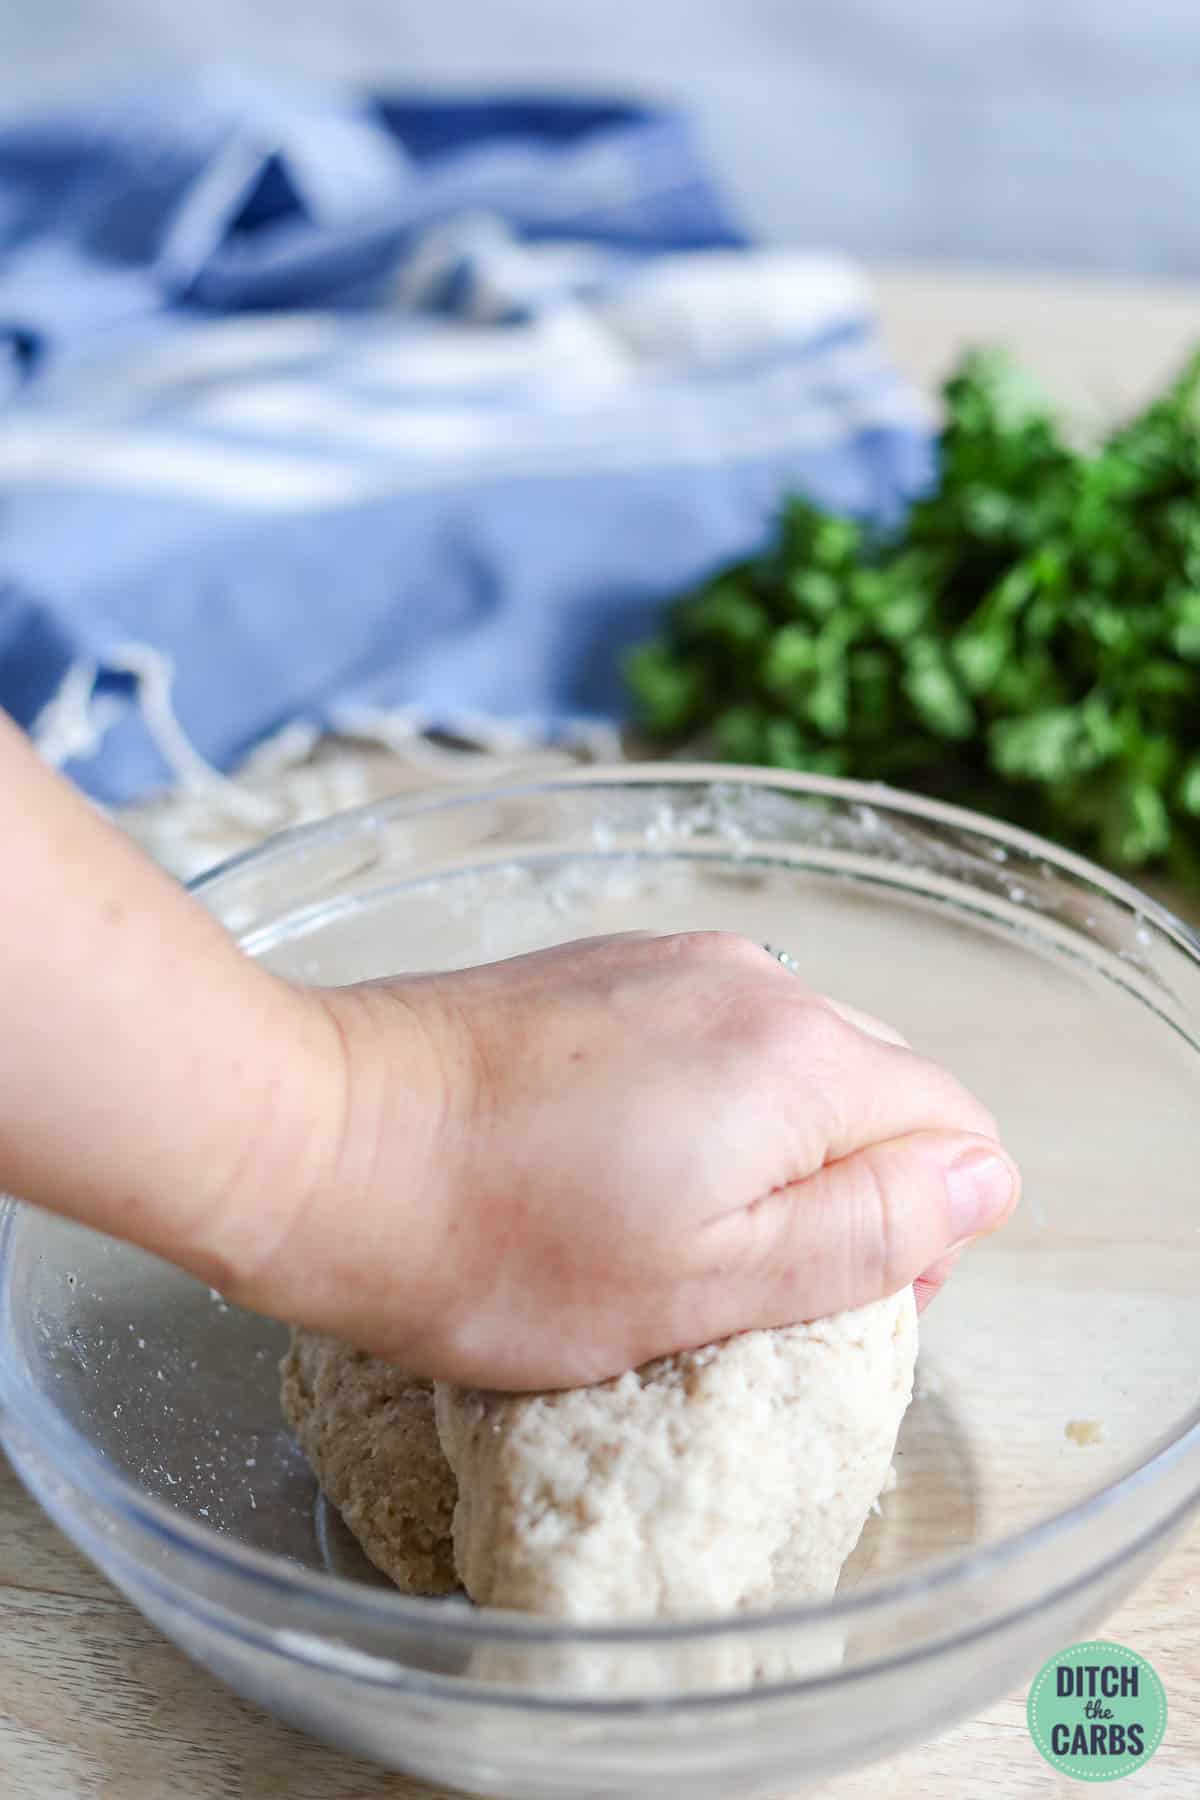 kneading roti dough by hand in a glass bowl